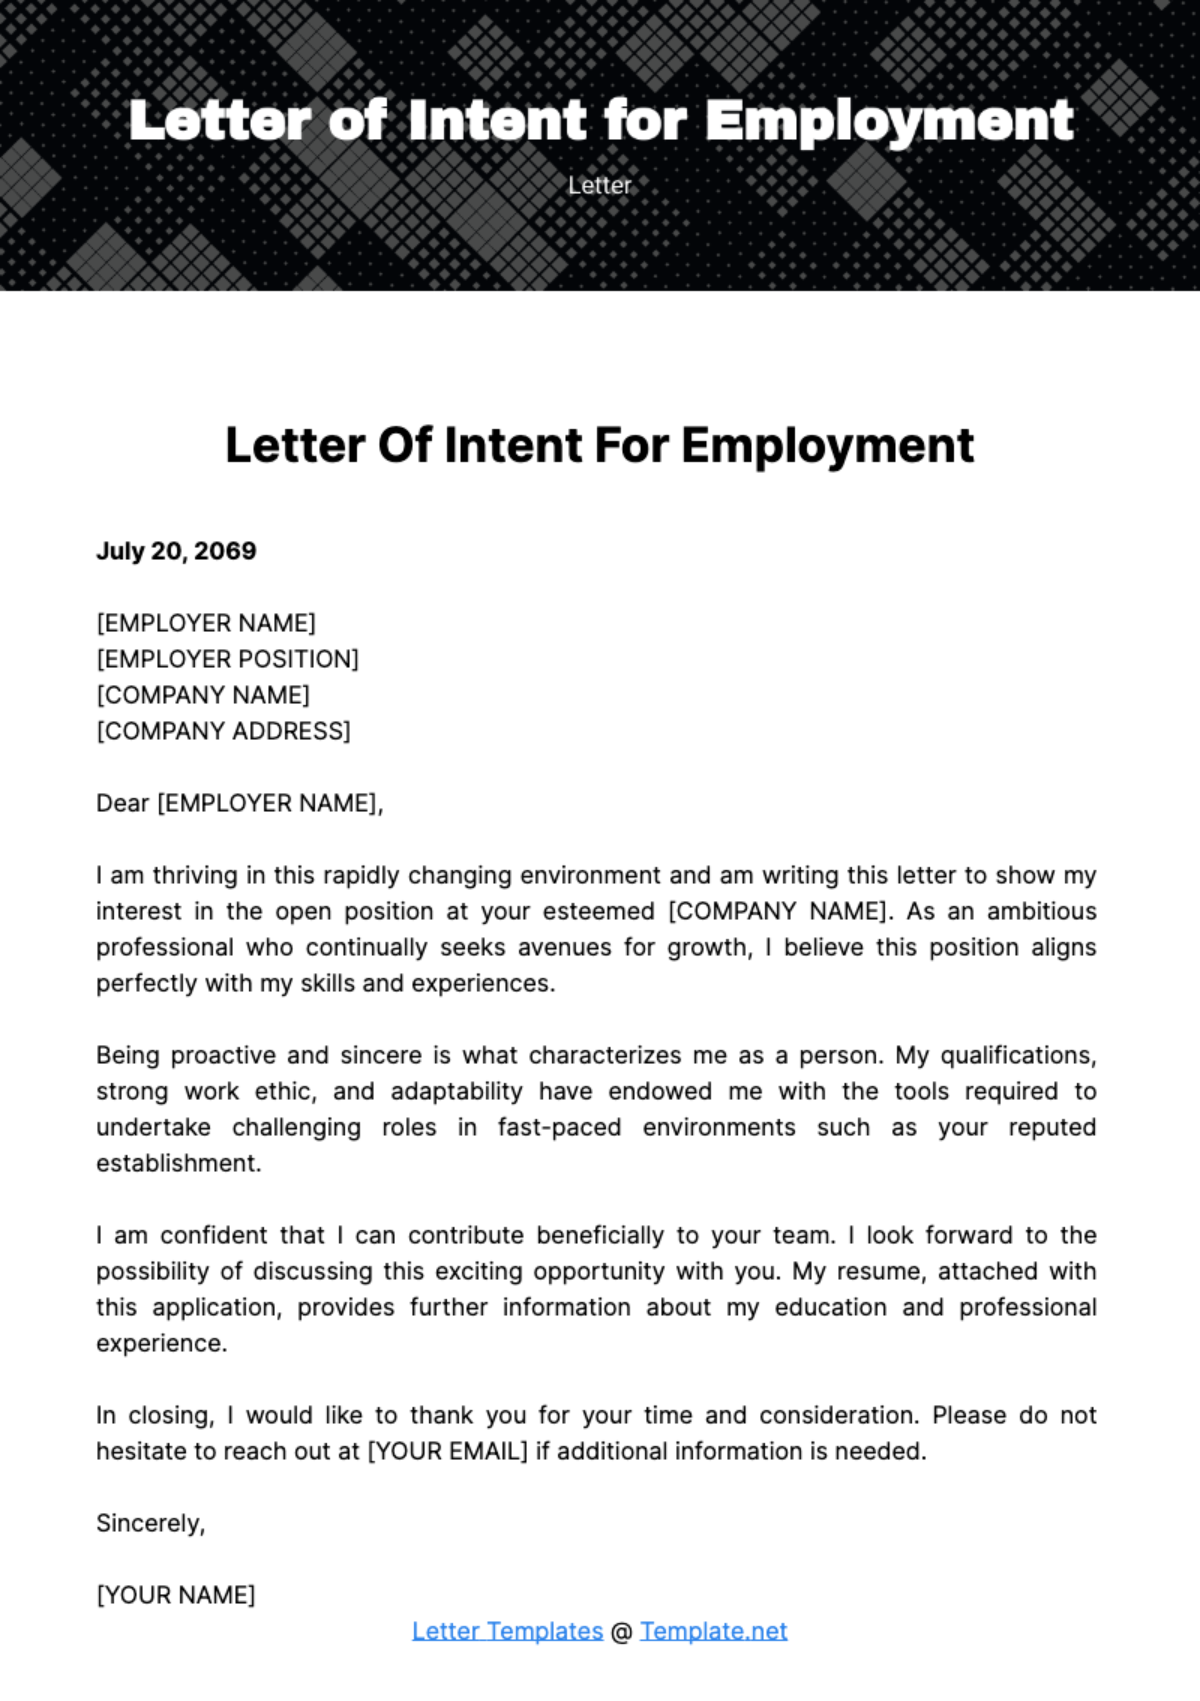 Free Letter of Intent for Employment Template